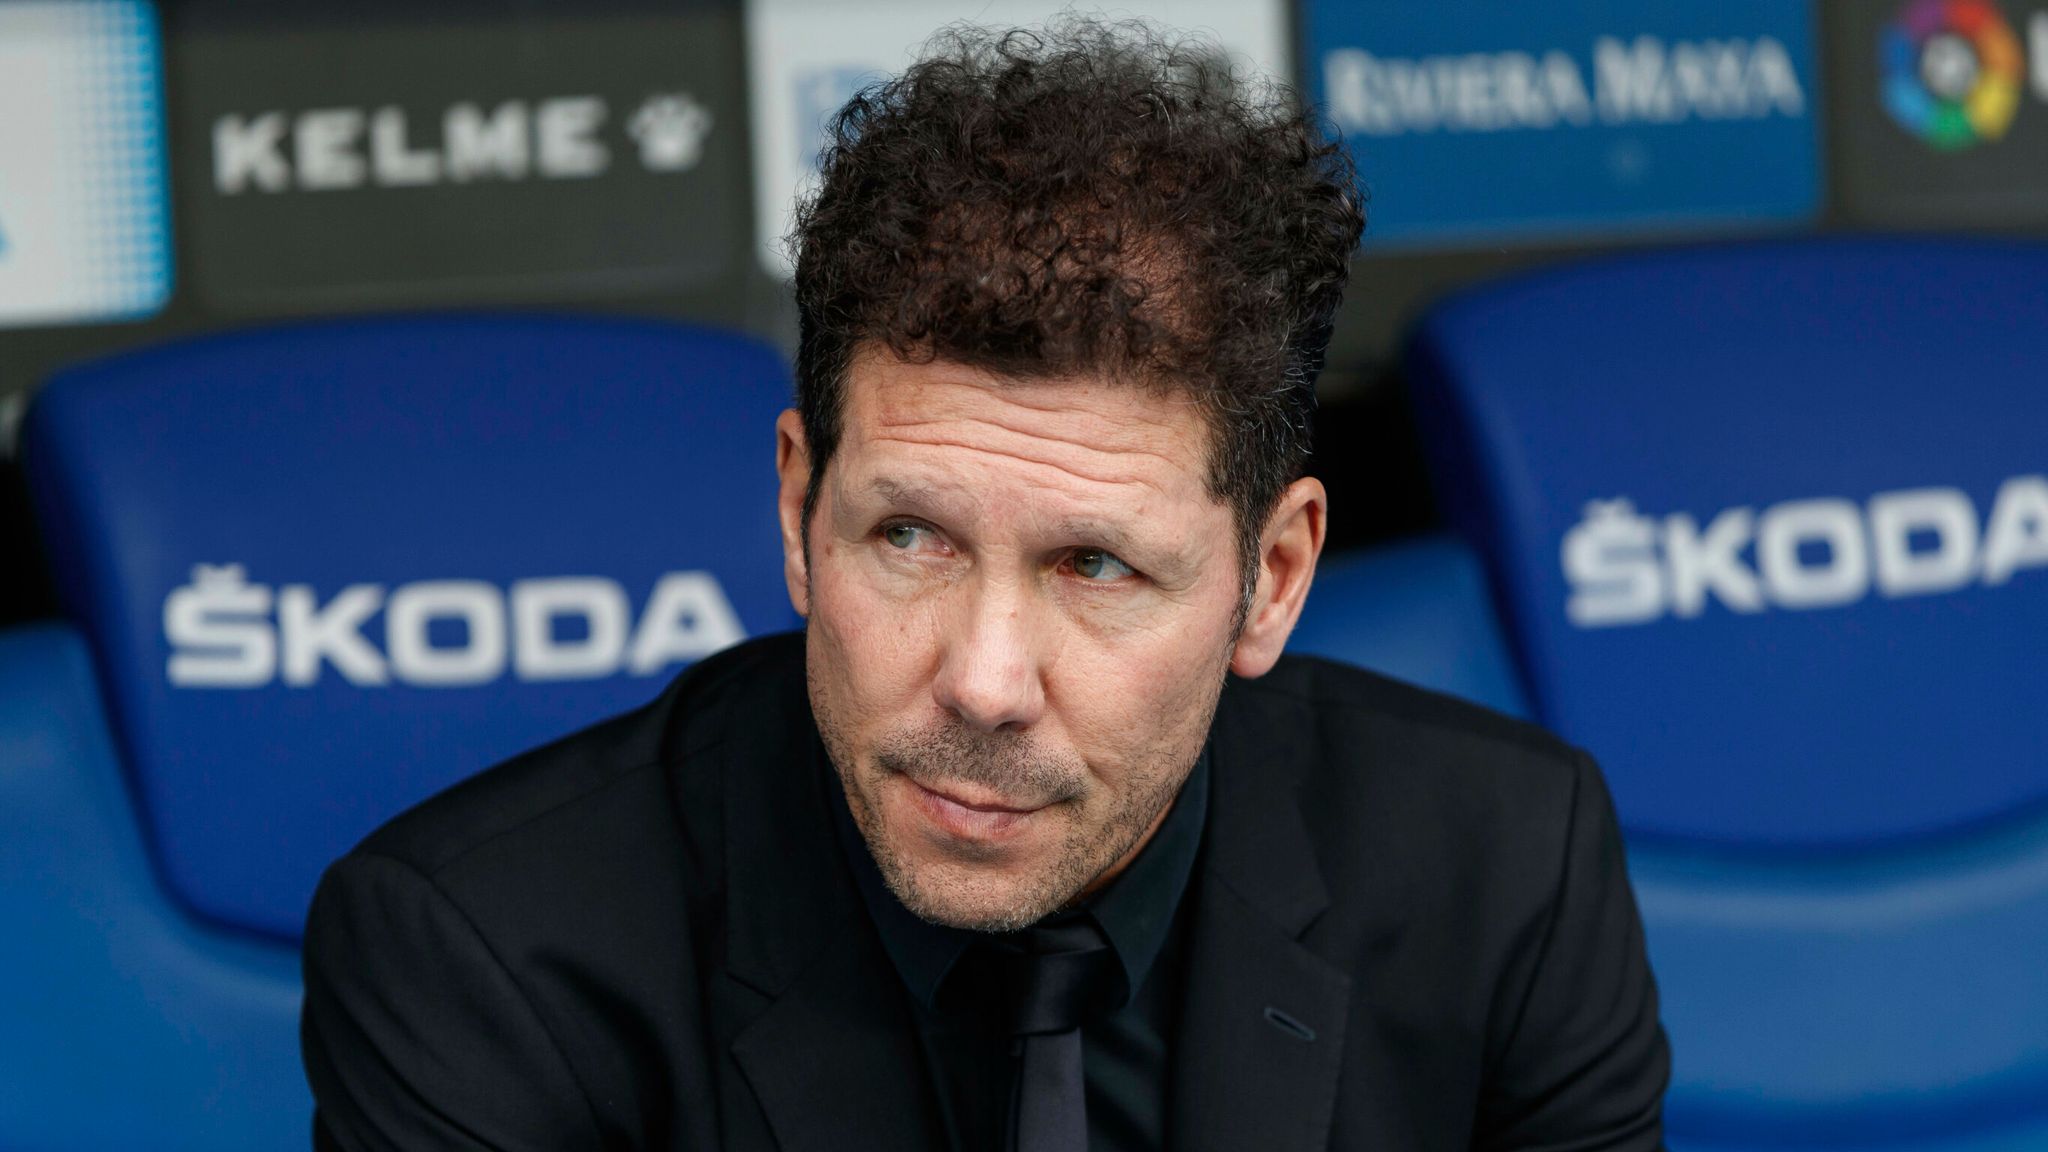 Diego Simeone: Atletico Madrid coach signs new three-year deal to remain in charge as head coach | Football News | Sky Sports